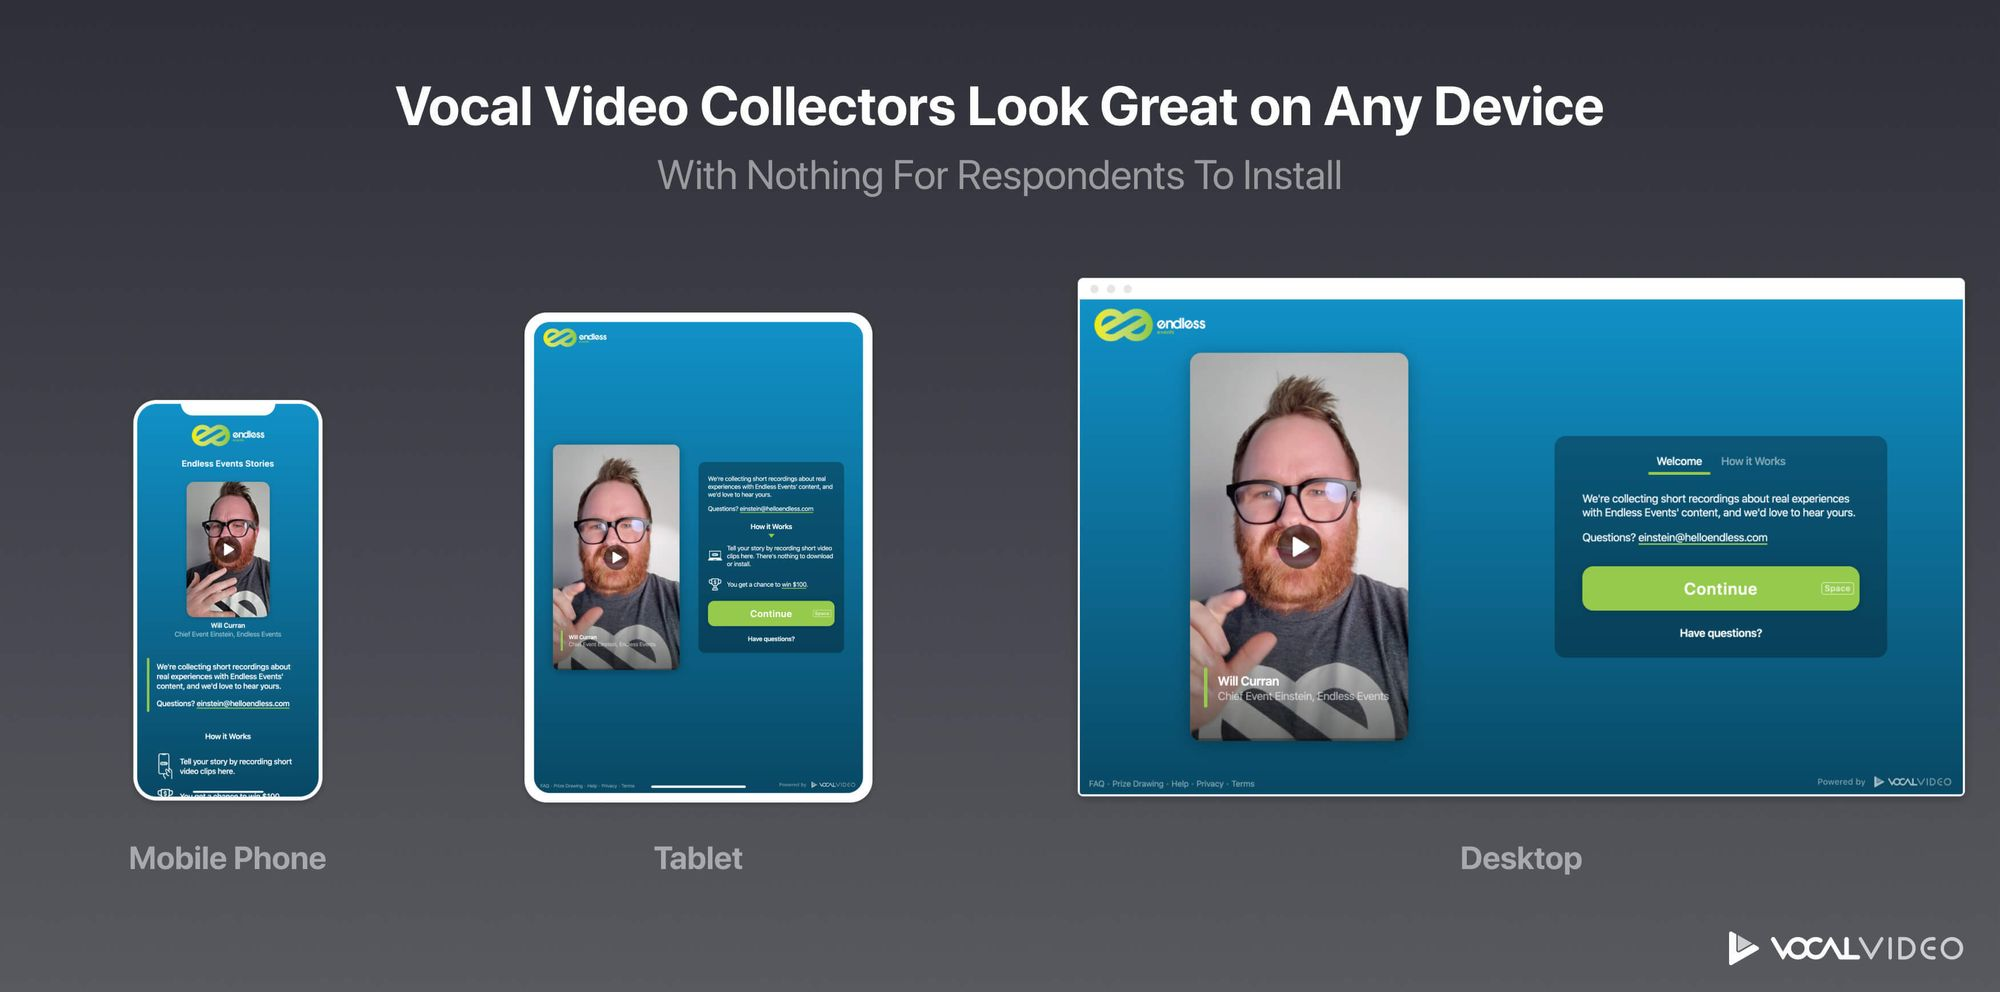 Vocal Video Collectors Look Great on Any Device: Mobile, Tablet, or Desktop